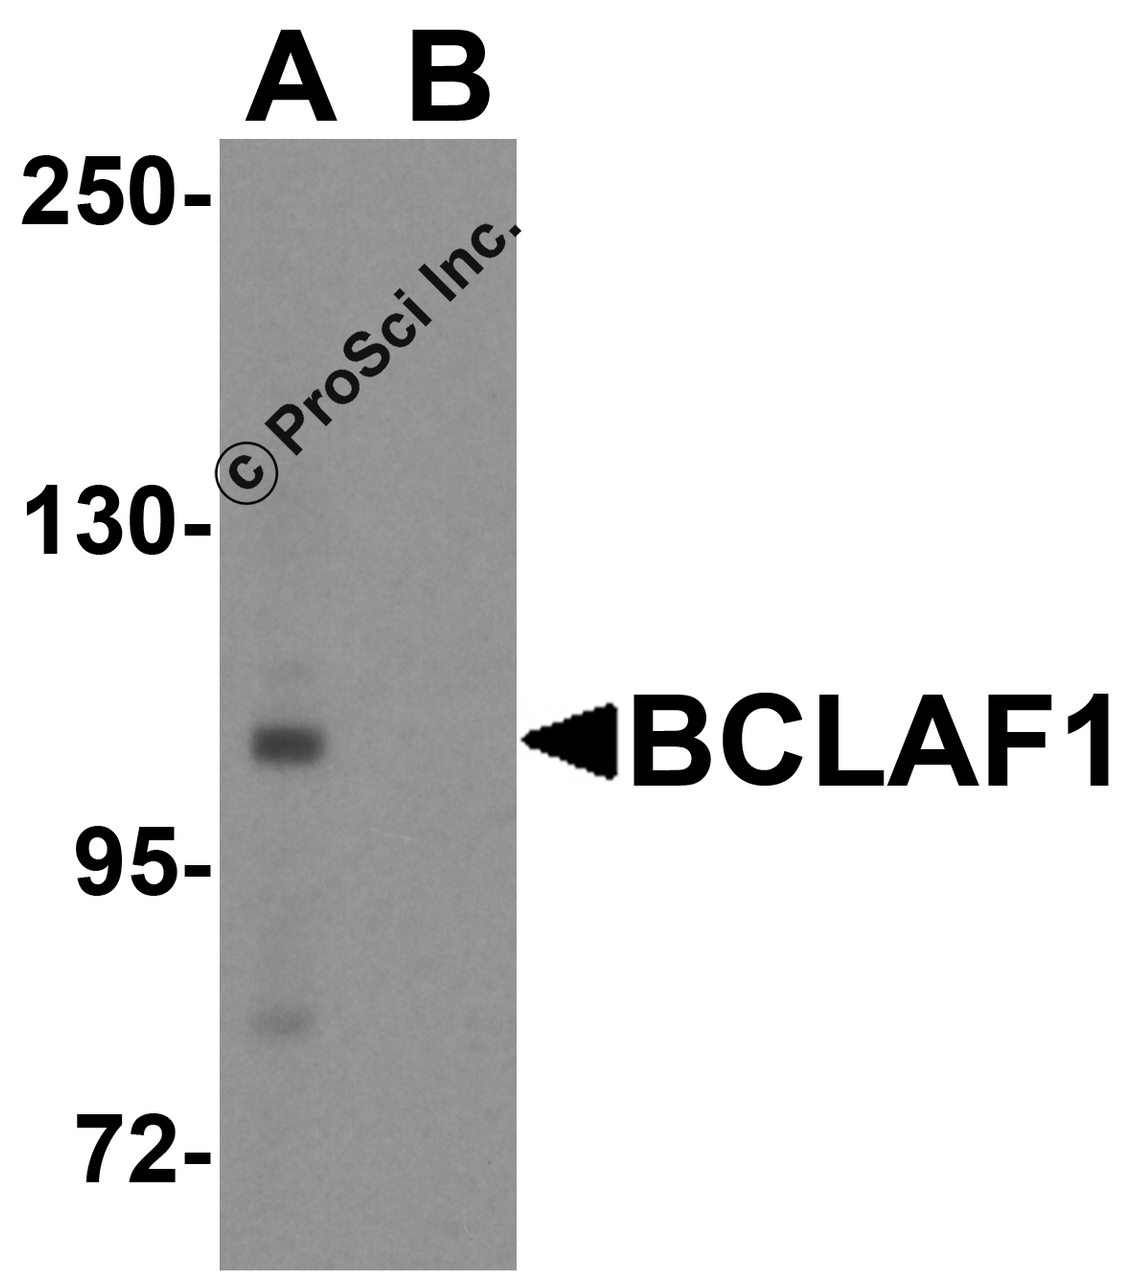 Western blot analysis of BCLAF1 in human brain tissue lysate with BCLAF1 antibody at 1 &#956;g/ml.